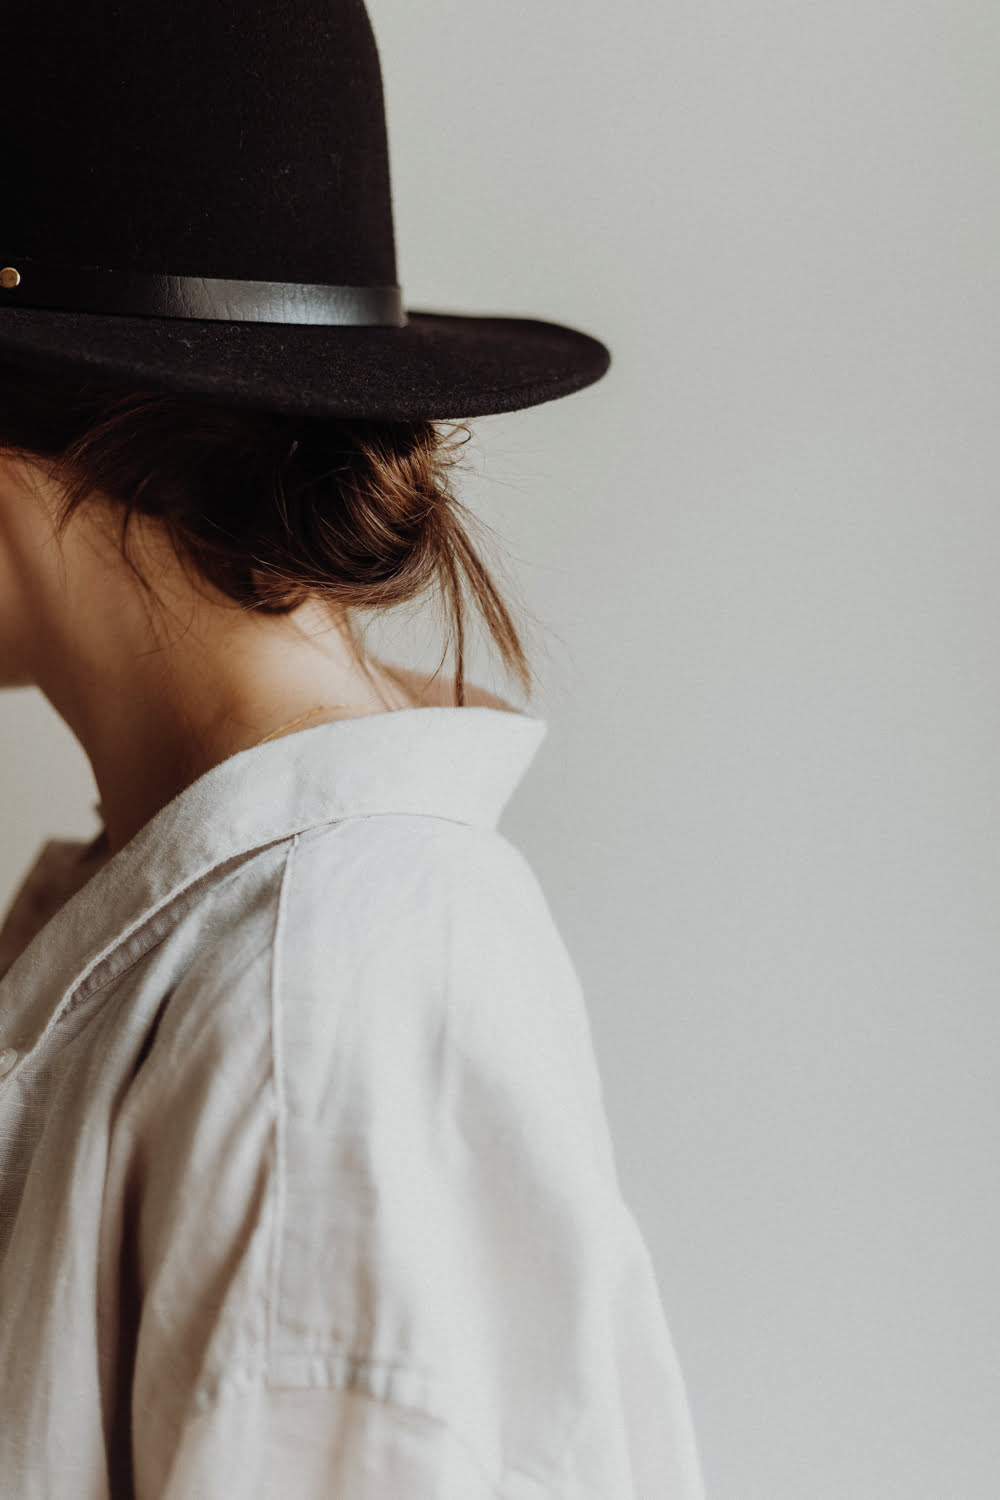 Girl with hat and linen shirt